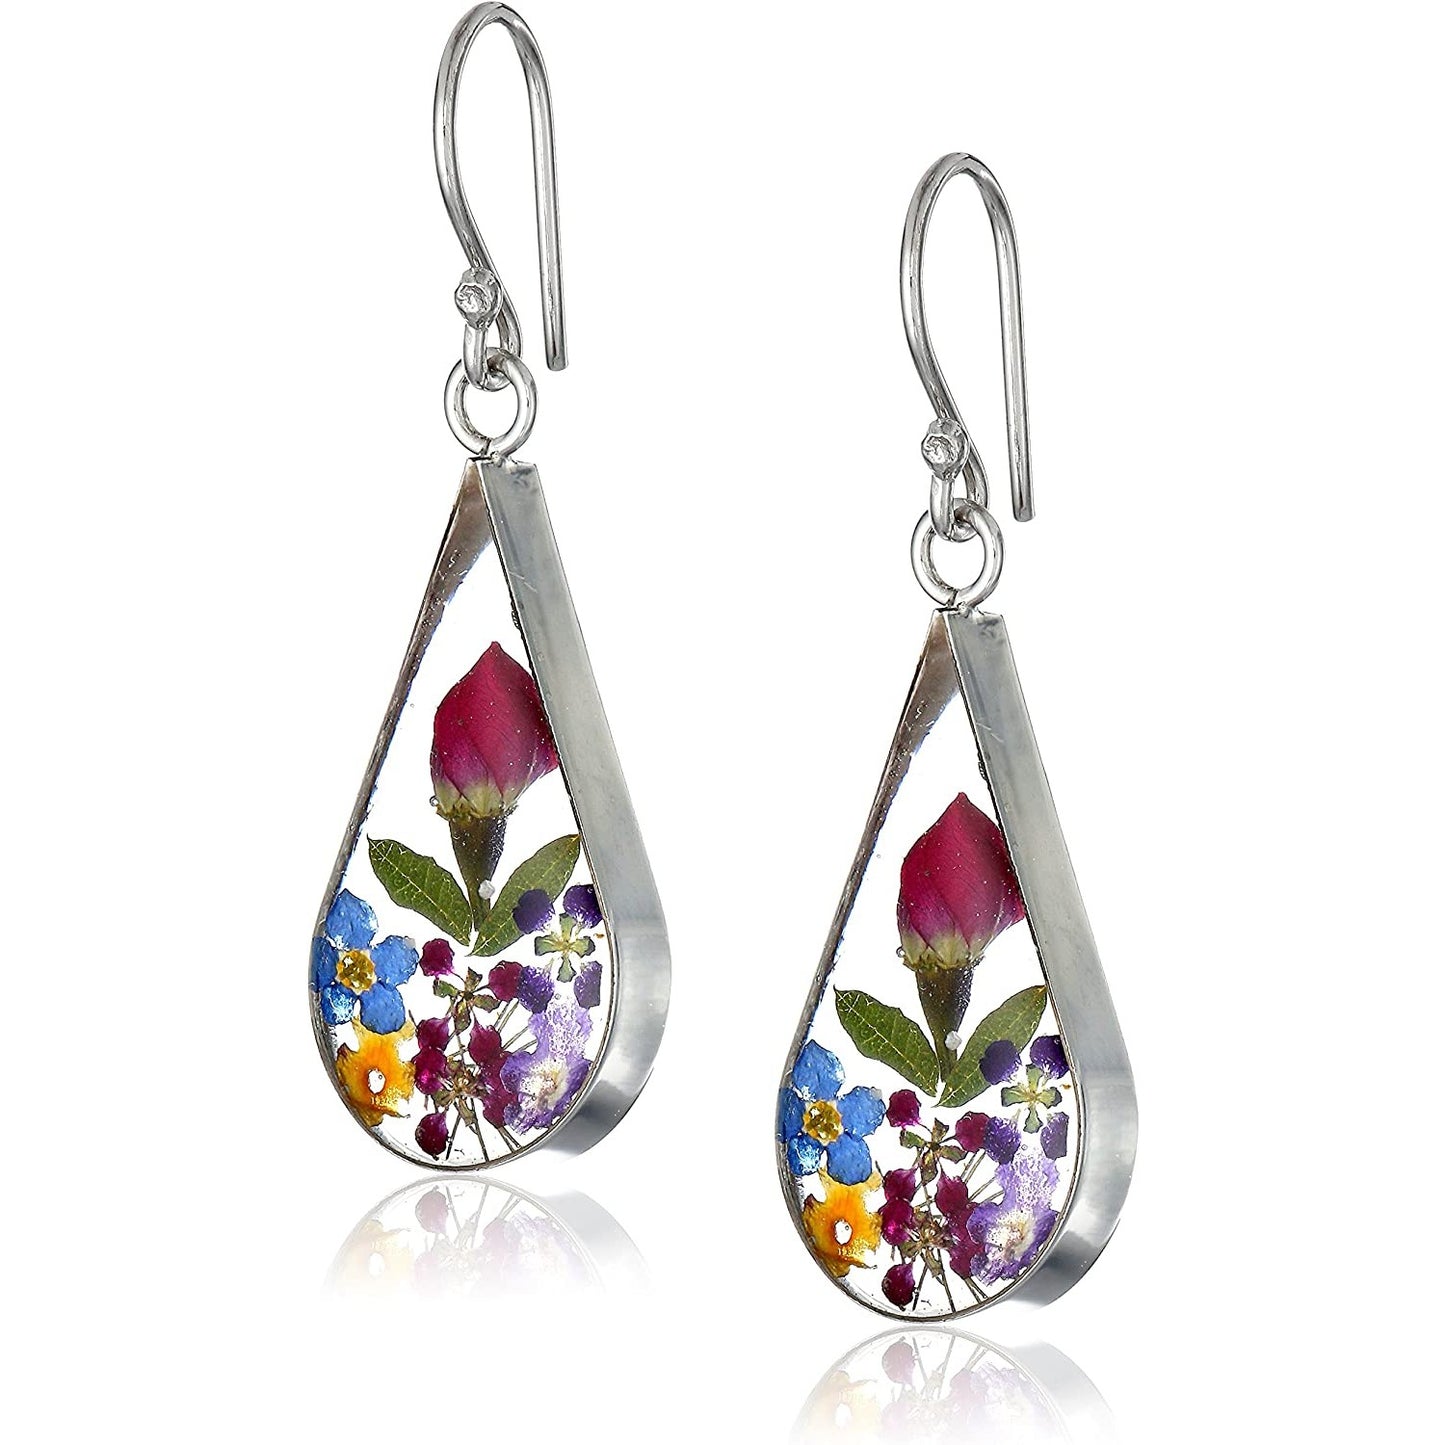 A pair of earrings with real pressed flowers inside.